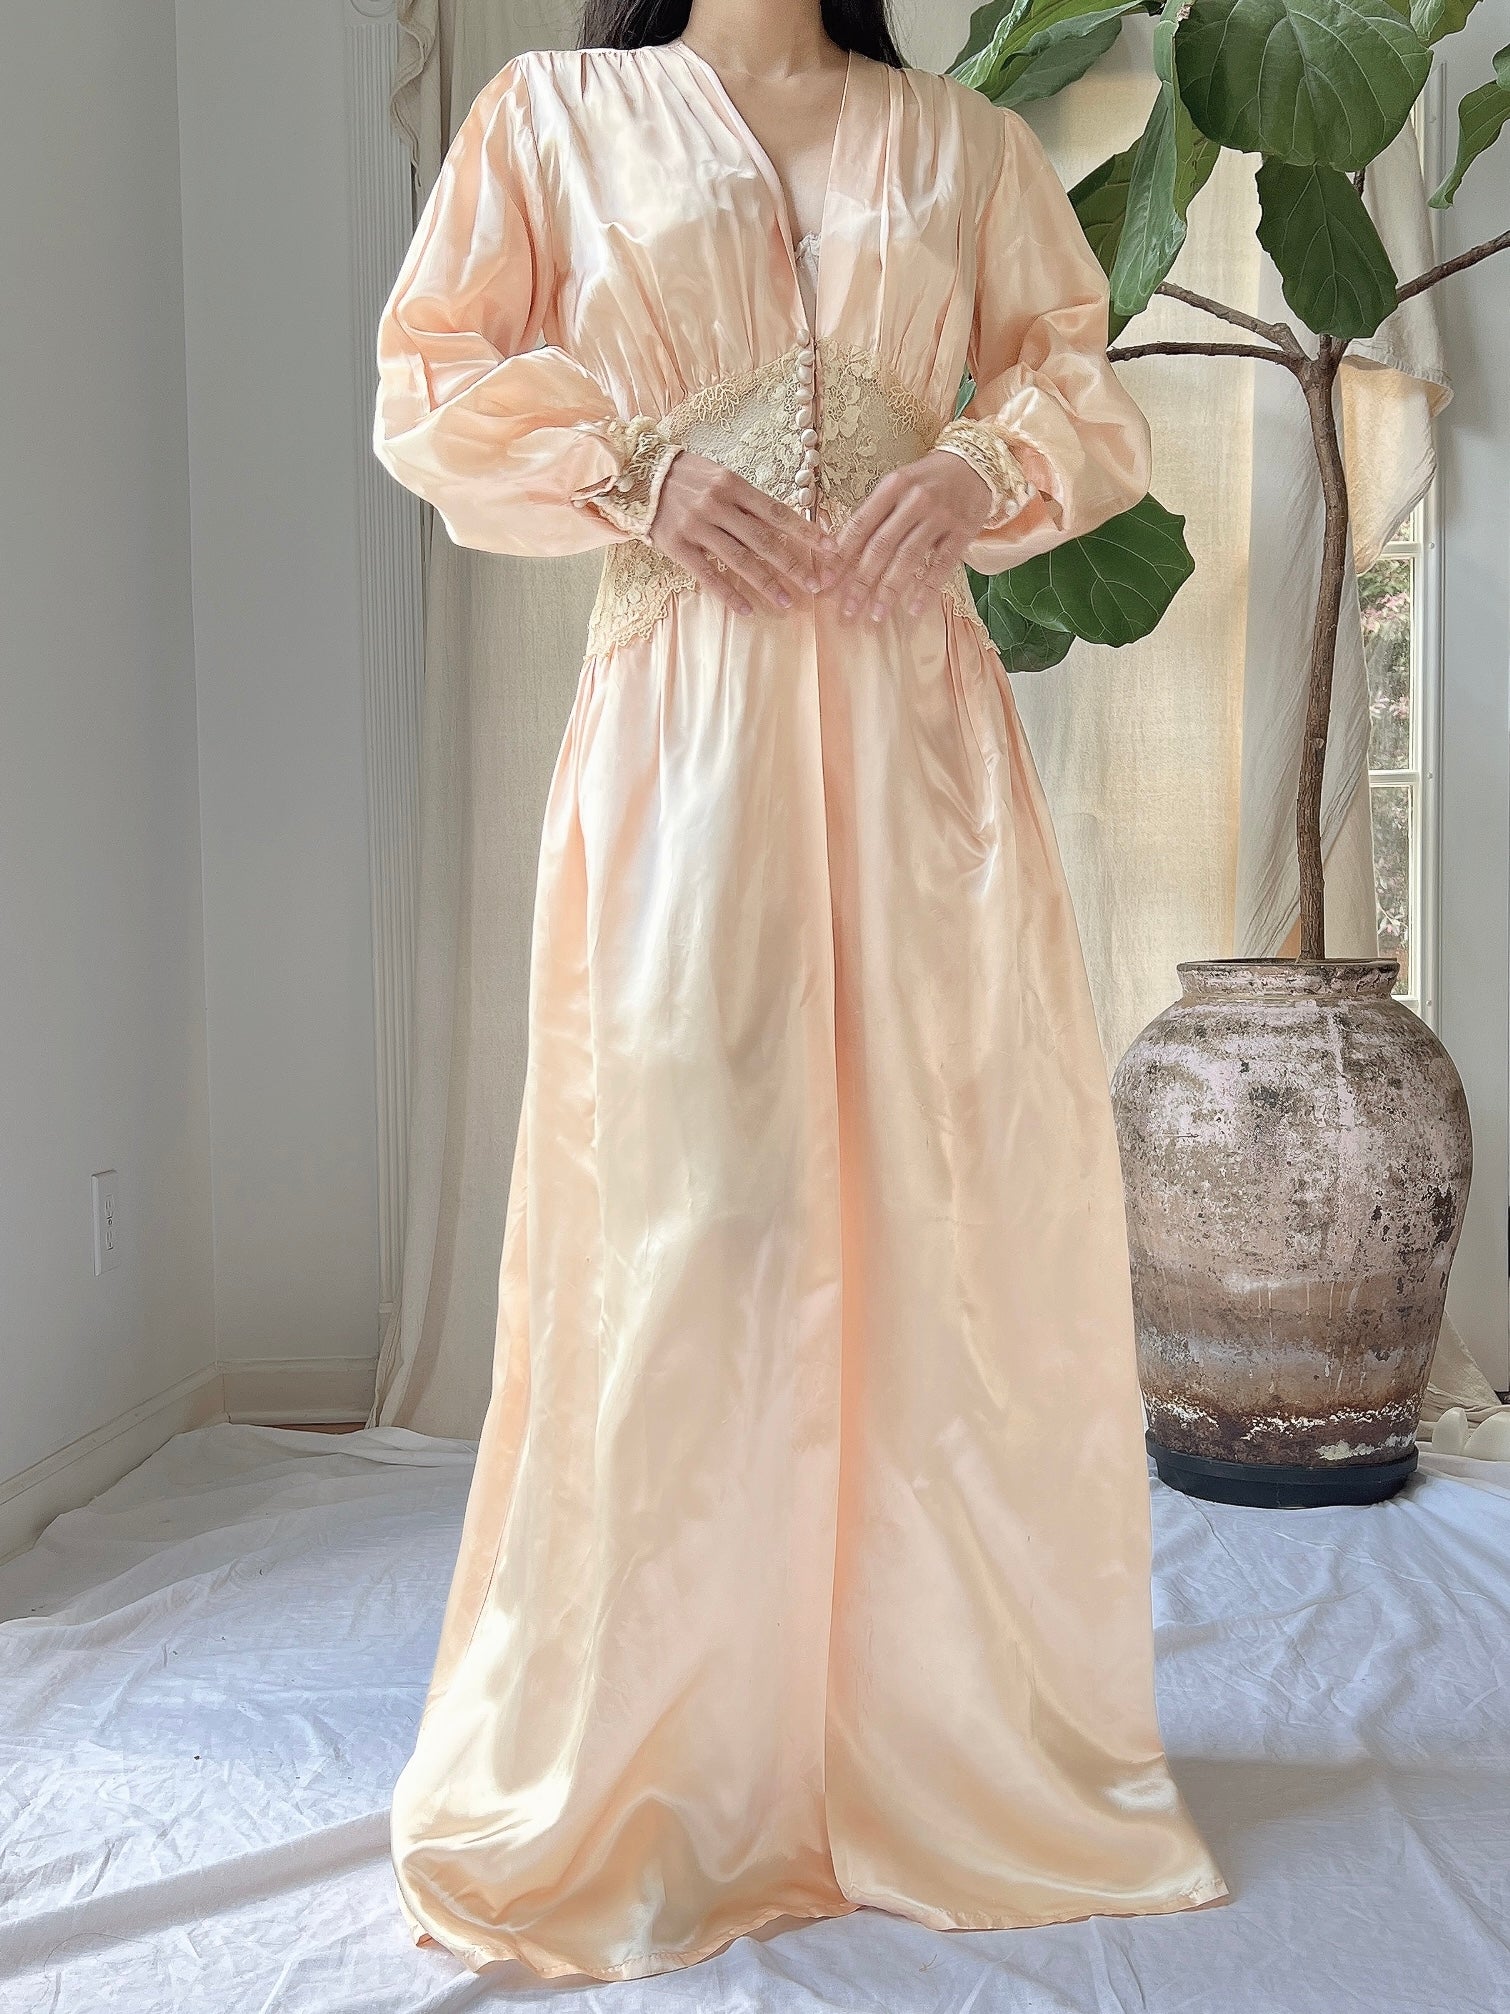 THE DRESSING GOWN in CITRUS AWNING STRIPED GAUZE – Lisa Marie Fernandez